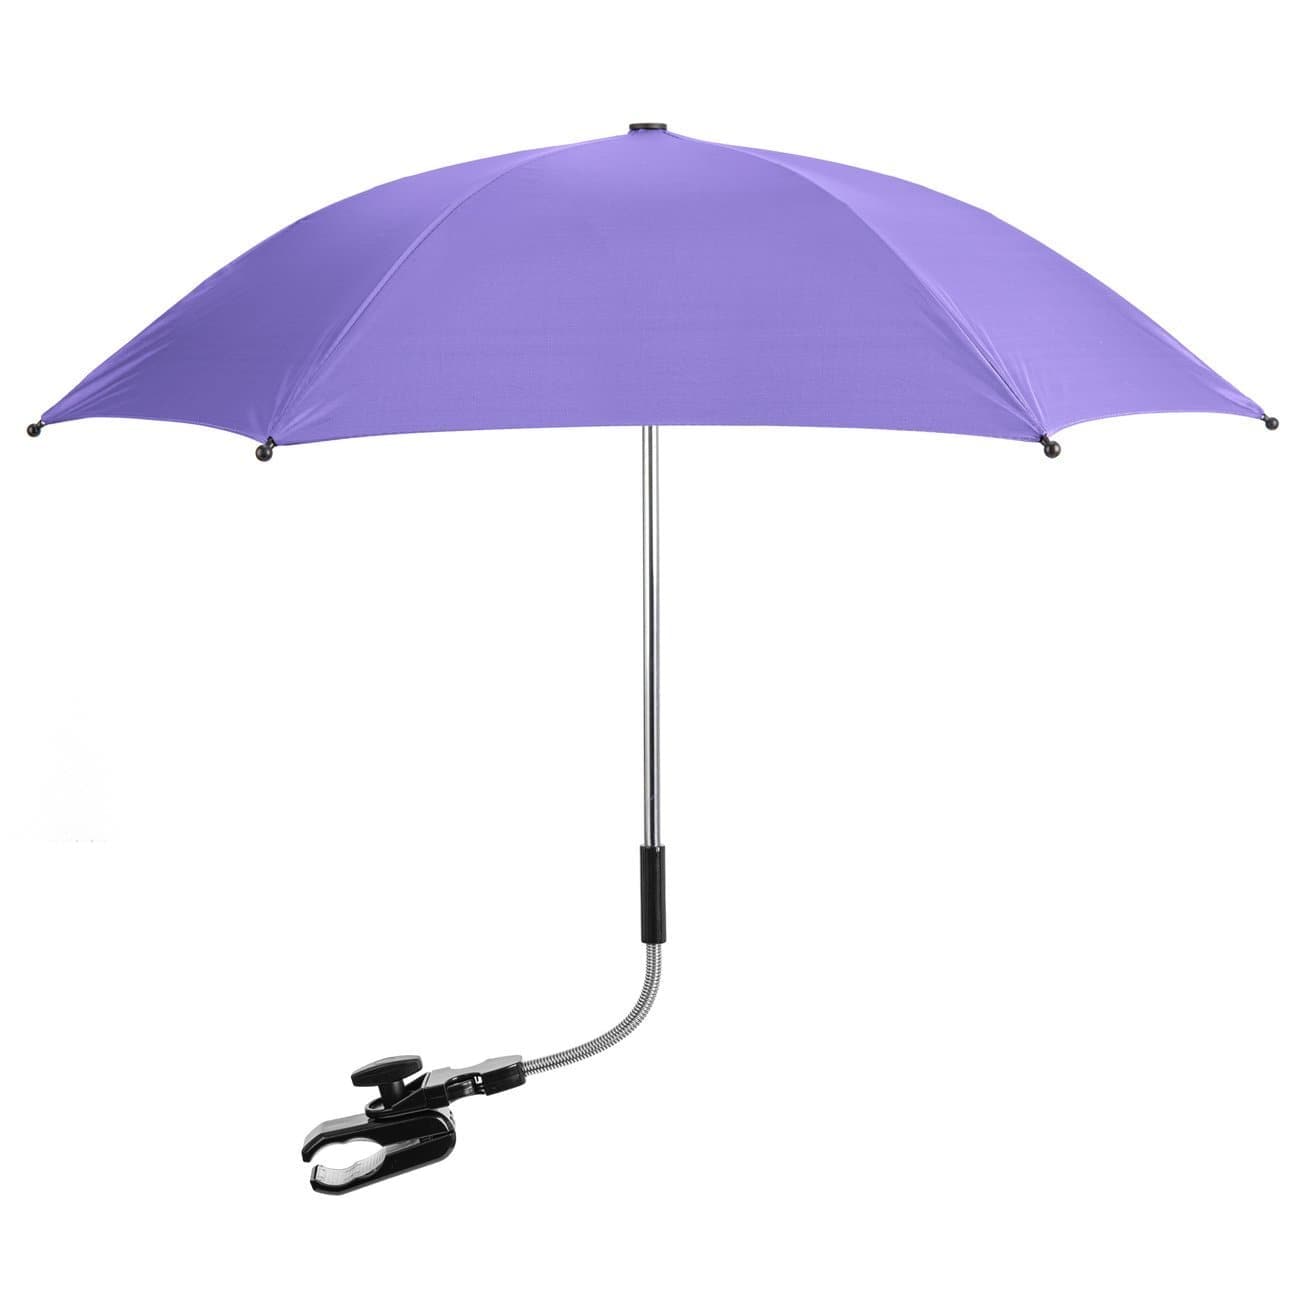 Baby Parasol Compatible With Safety 1st - Fits All Models - For Your Little One